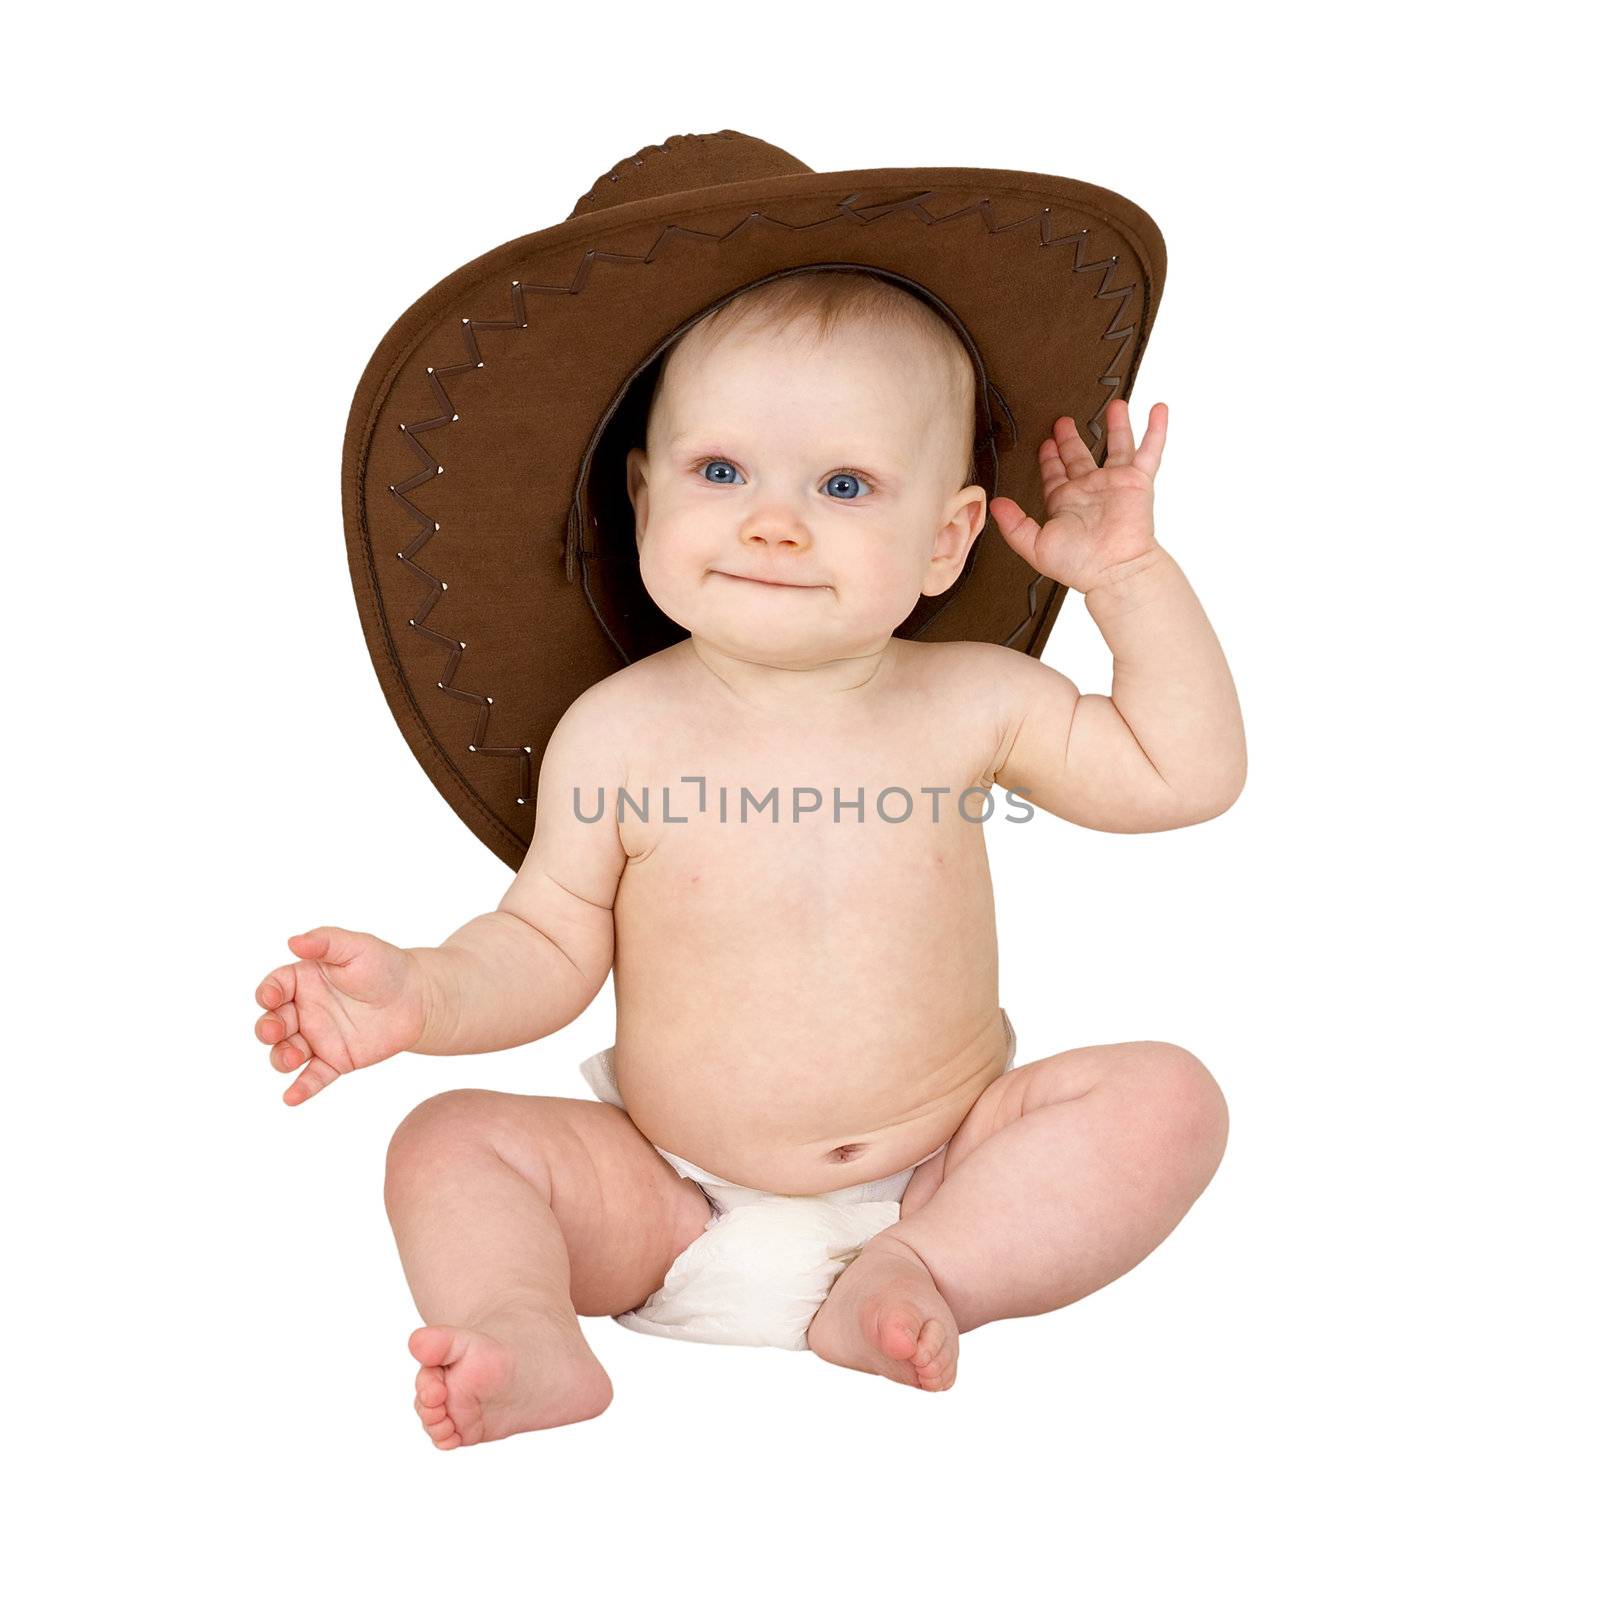 Baby in cowboy hat on the white background